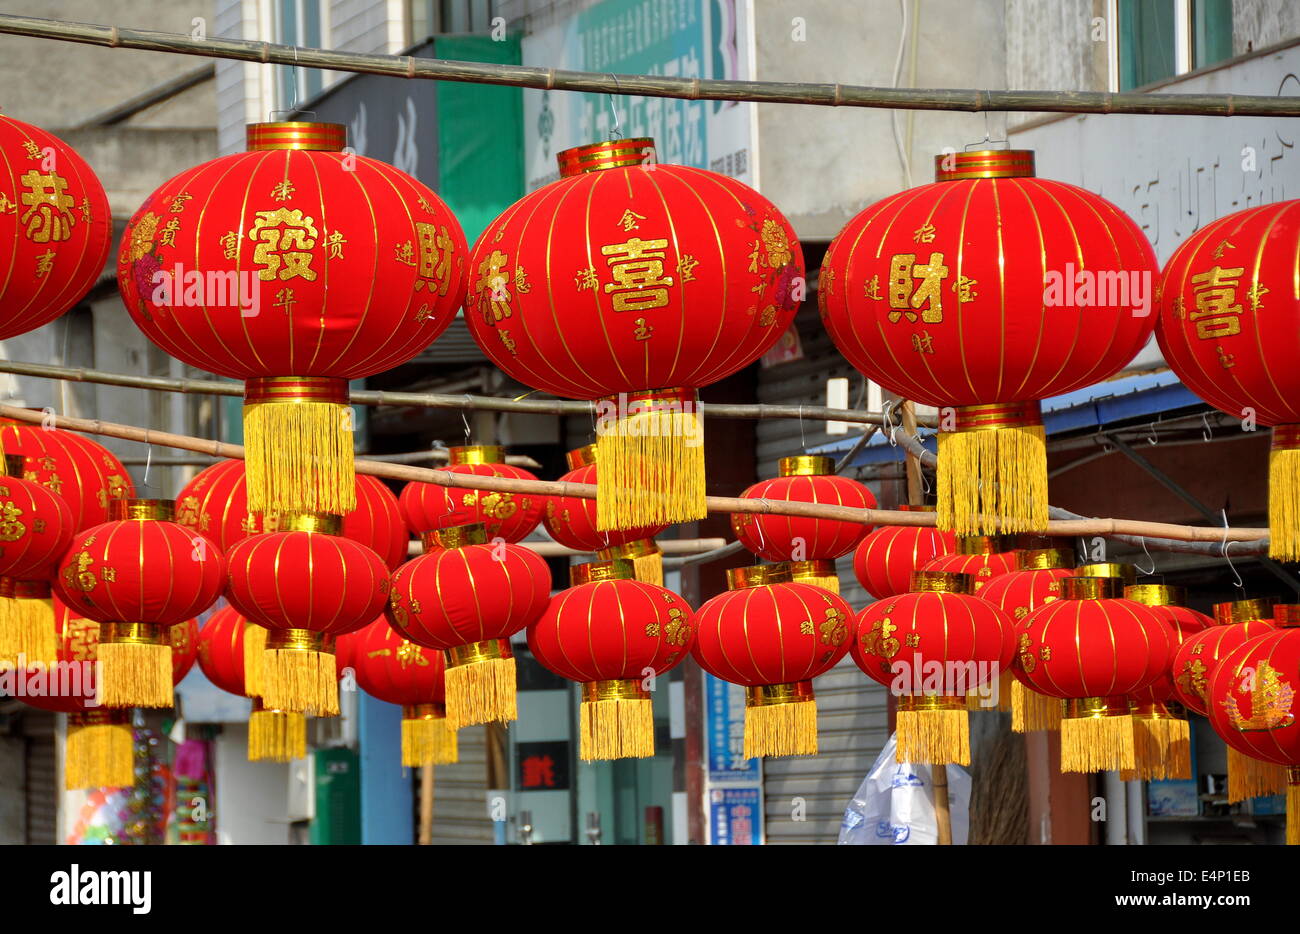 Jun Le, china:  Rows of bright red lanterns for the Chinese Lunar New Year holiday hang in front of a hardware store Stock Photo